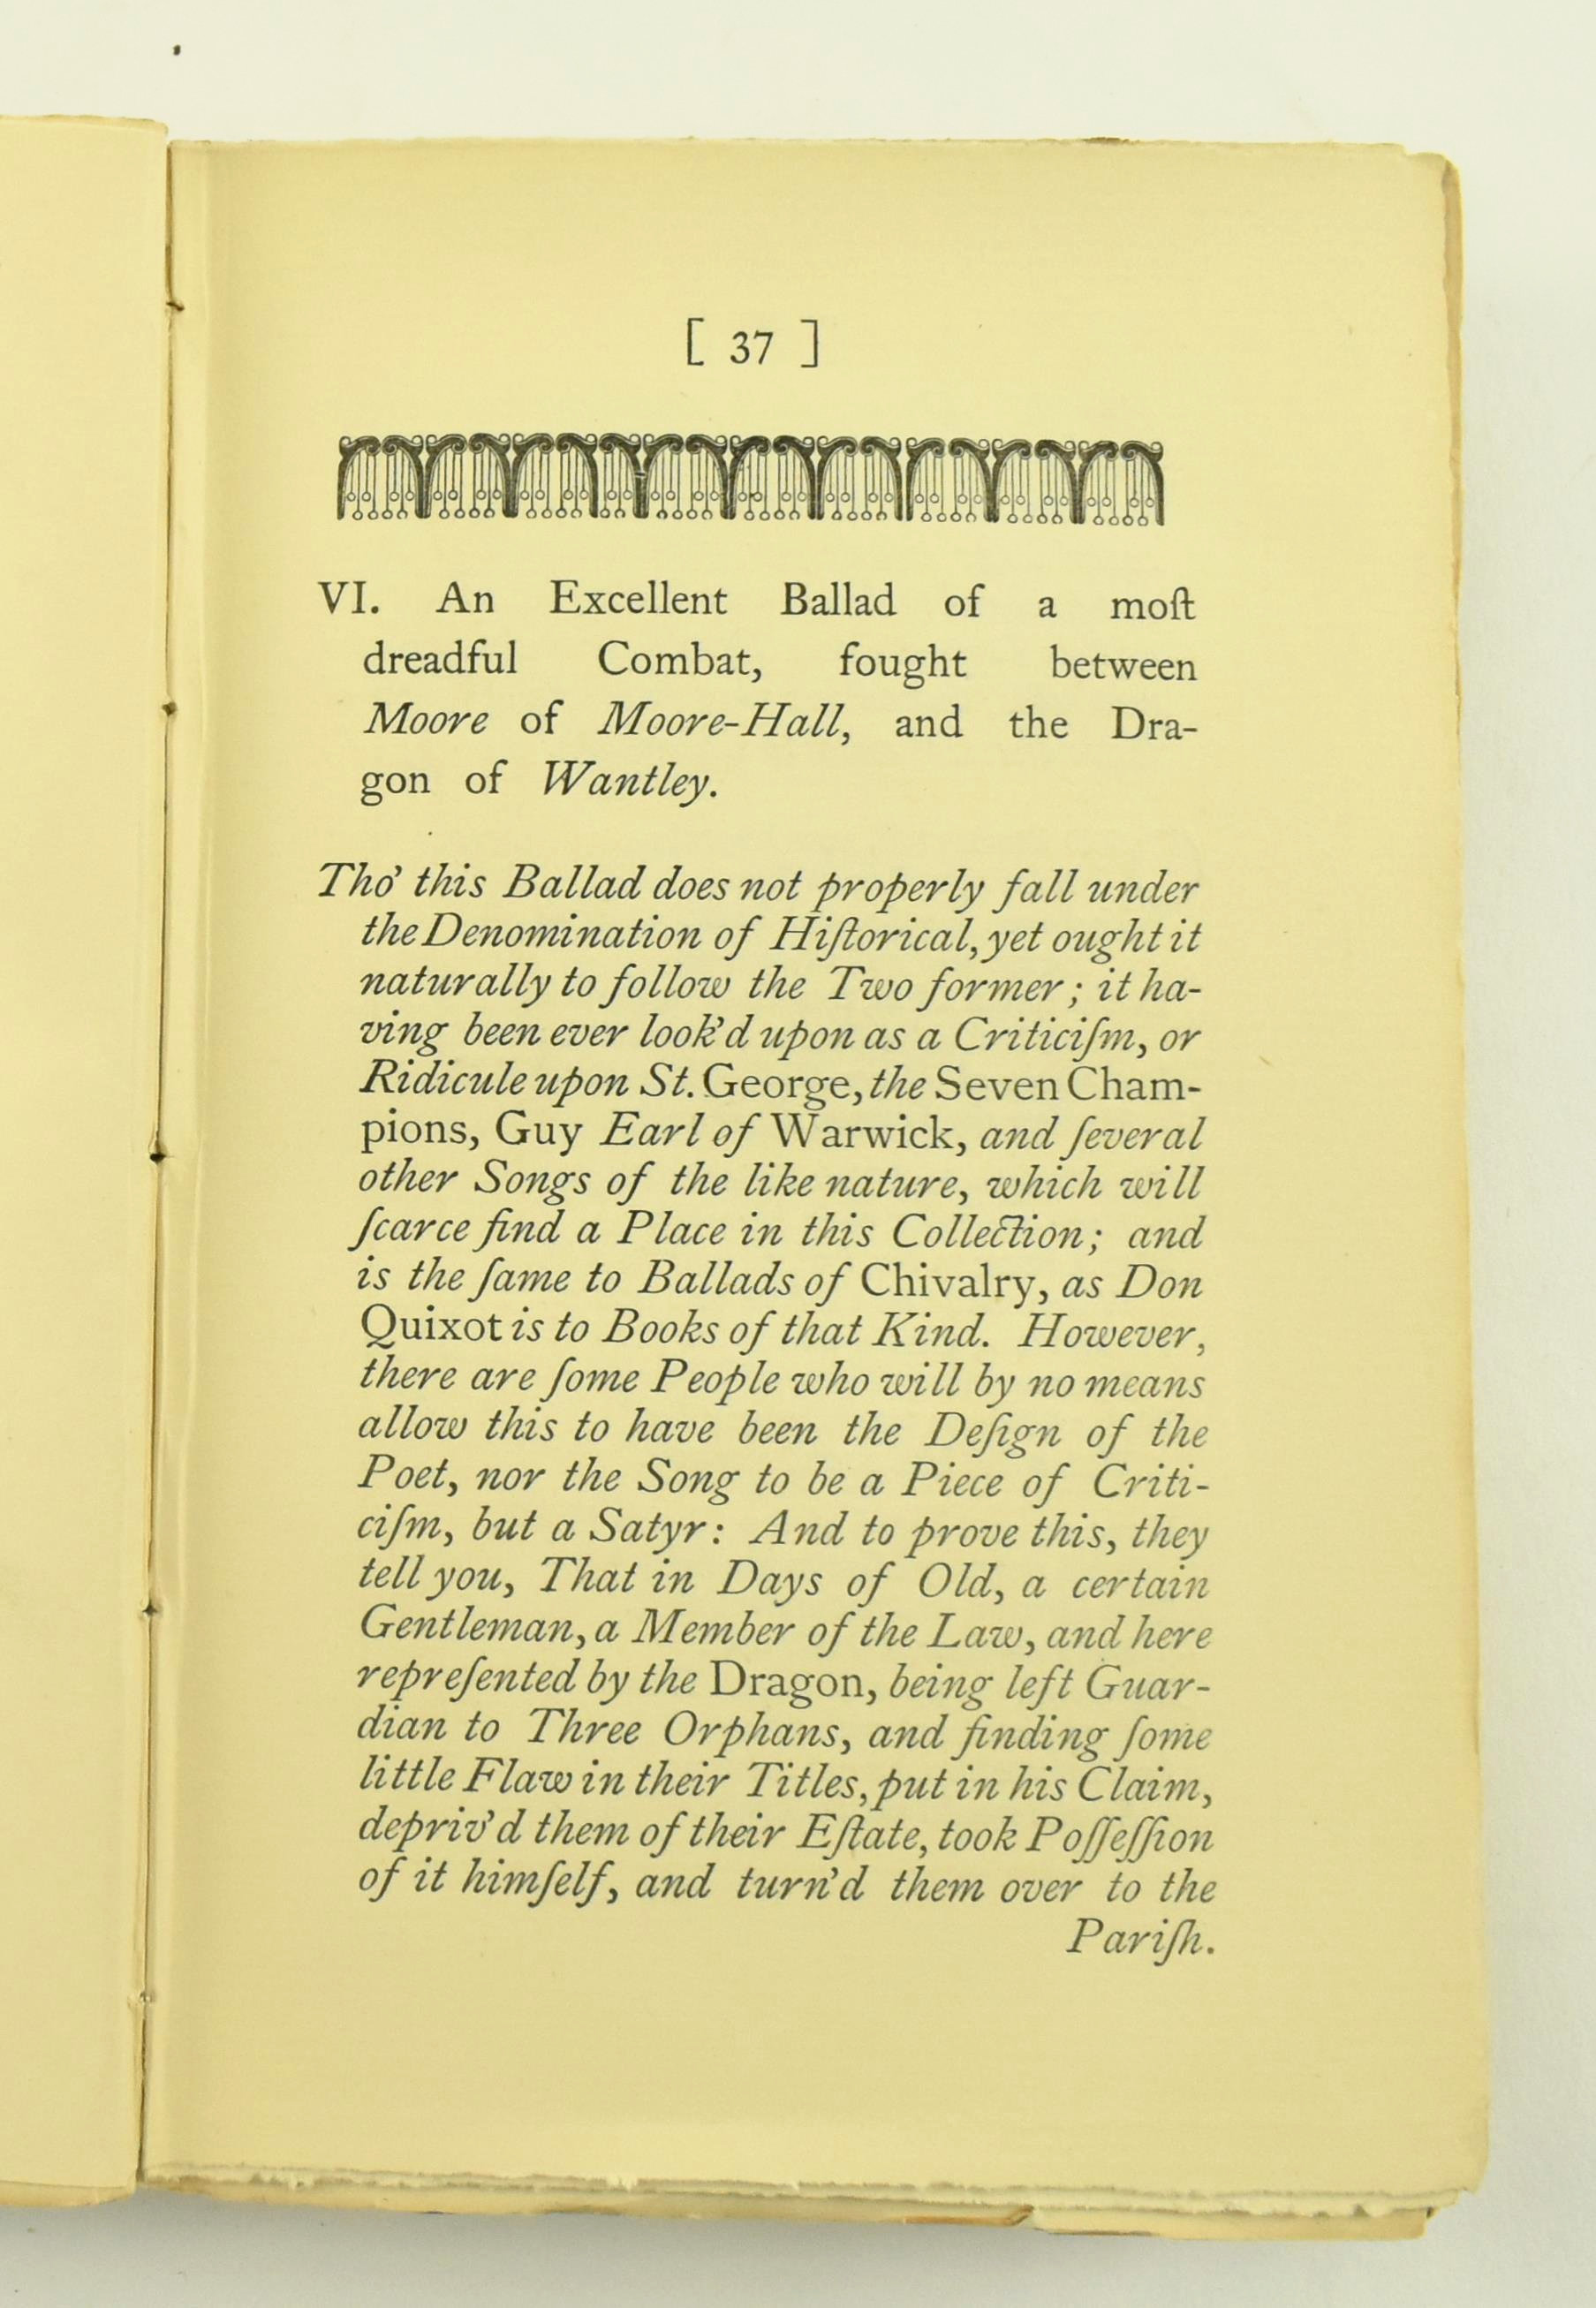 (PHILIPS, AMBROSE) 1728 COLLECTION OF OLD BALLADS - Image 5 of 6